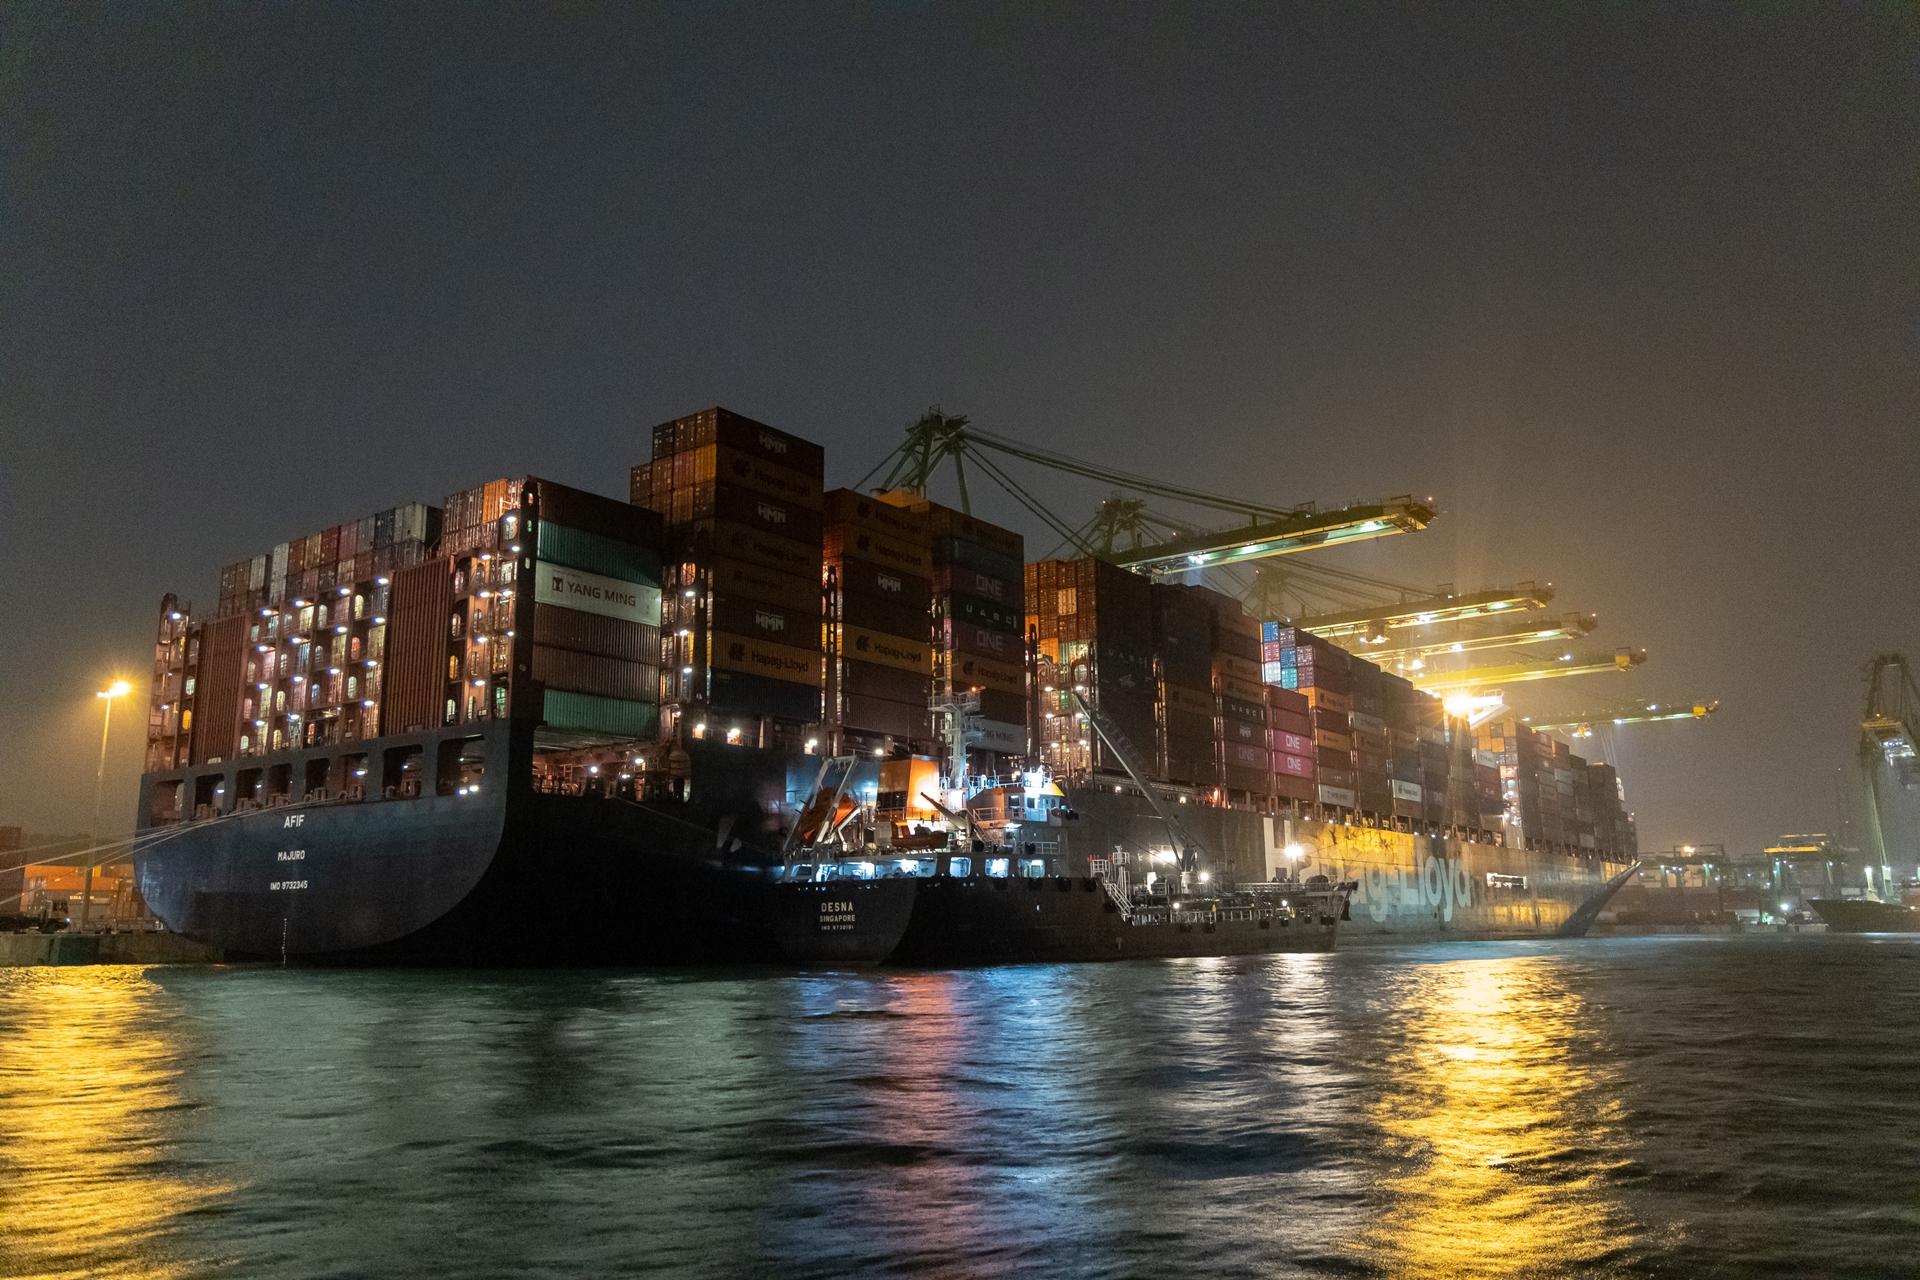 TotalEnergies Marine Fuels kick-started its first biofuel bunker term delivery for Hapag Lloyd in Singapore, with the refuelling of the Afif container ship with 2,000 MT of B24 biofuel on 20th January, 2023.